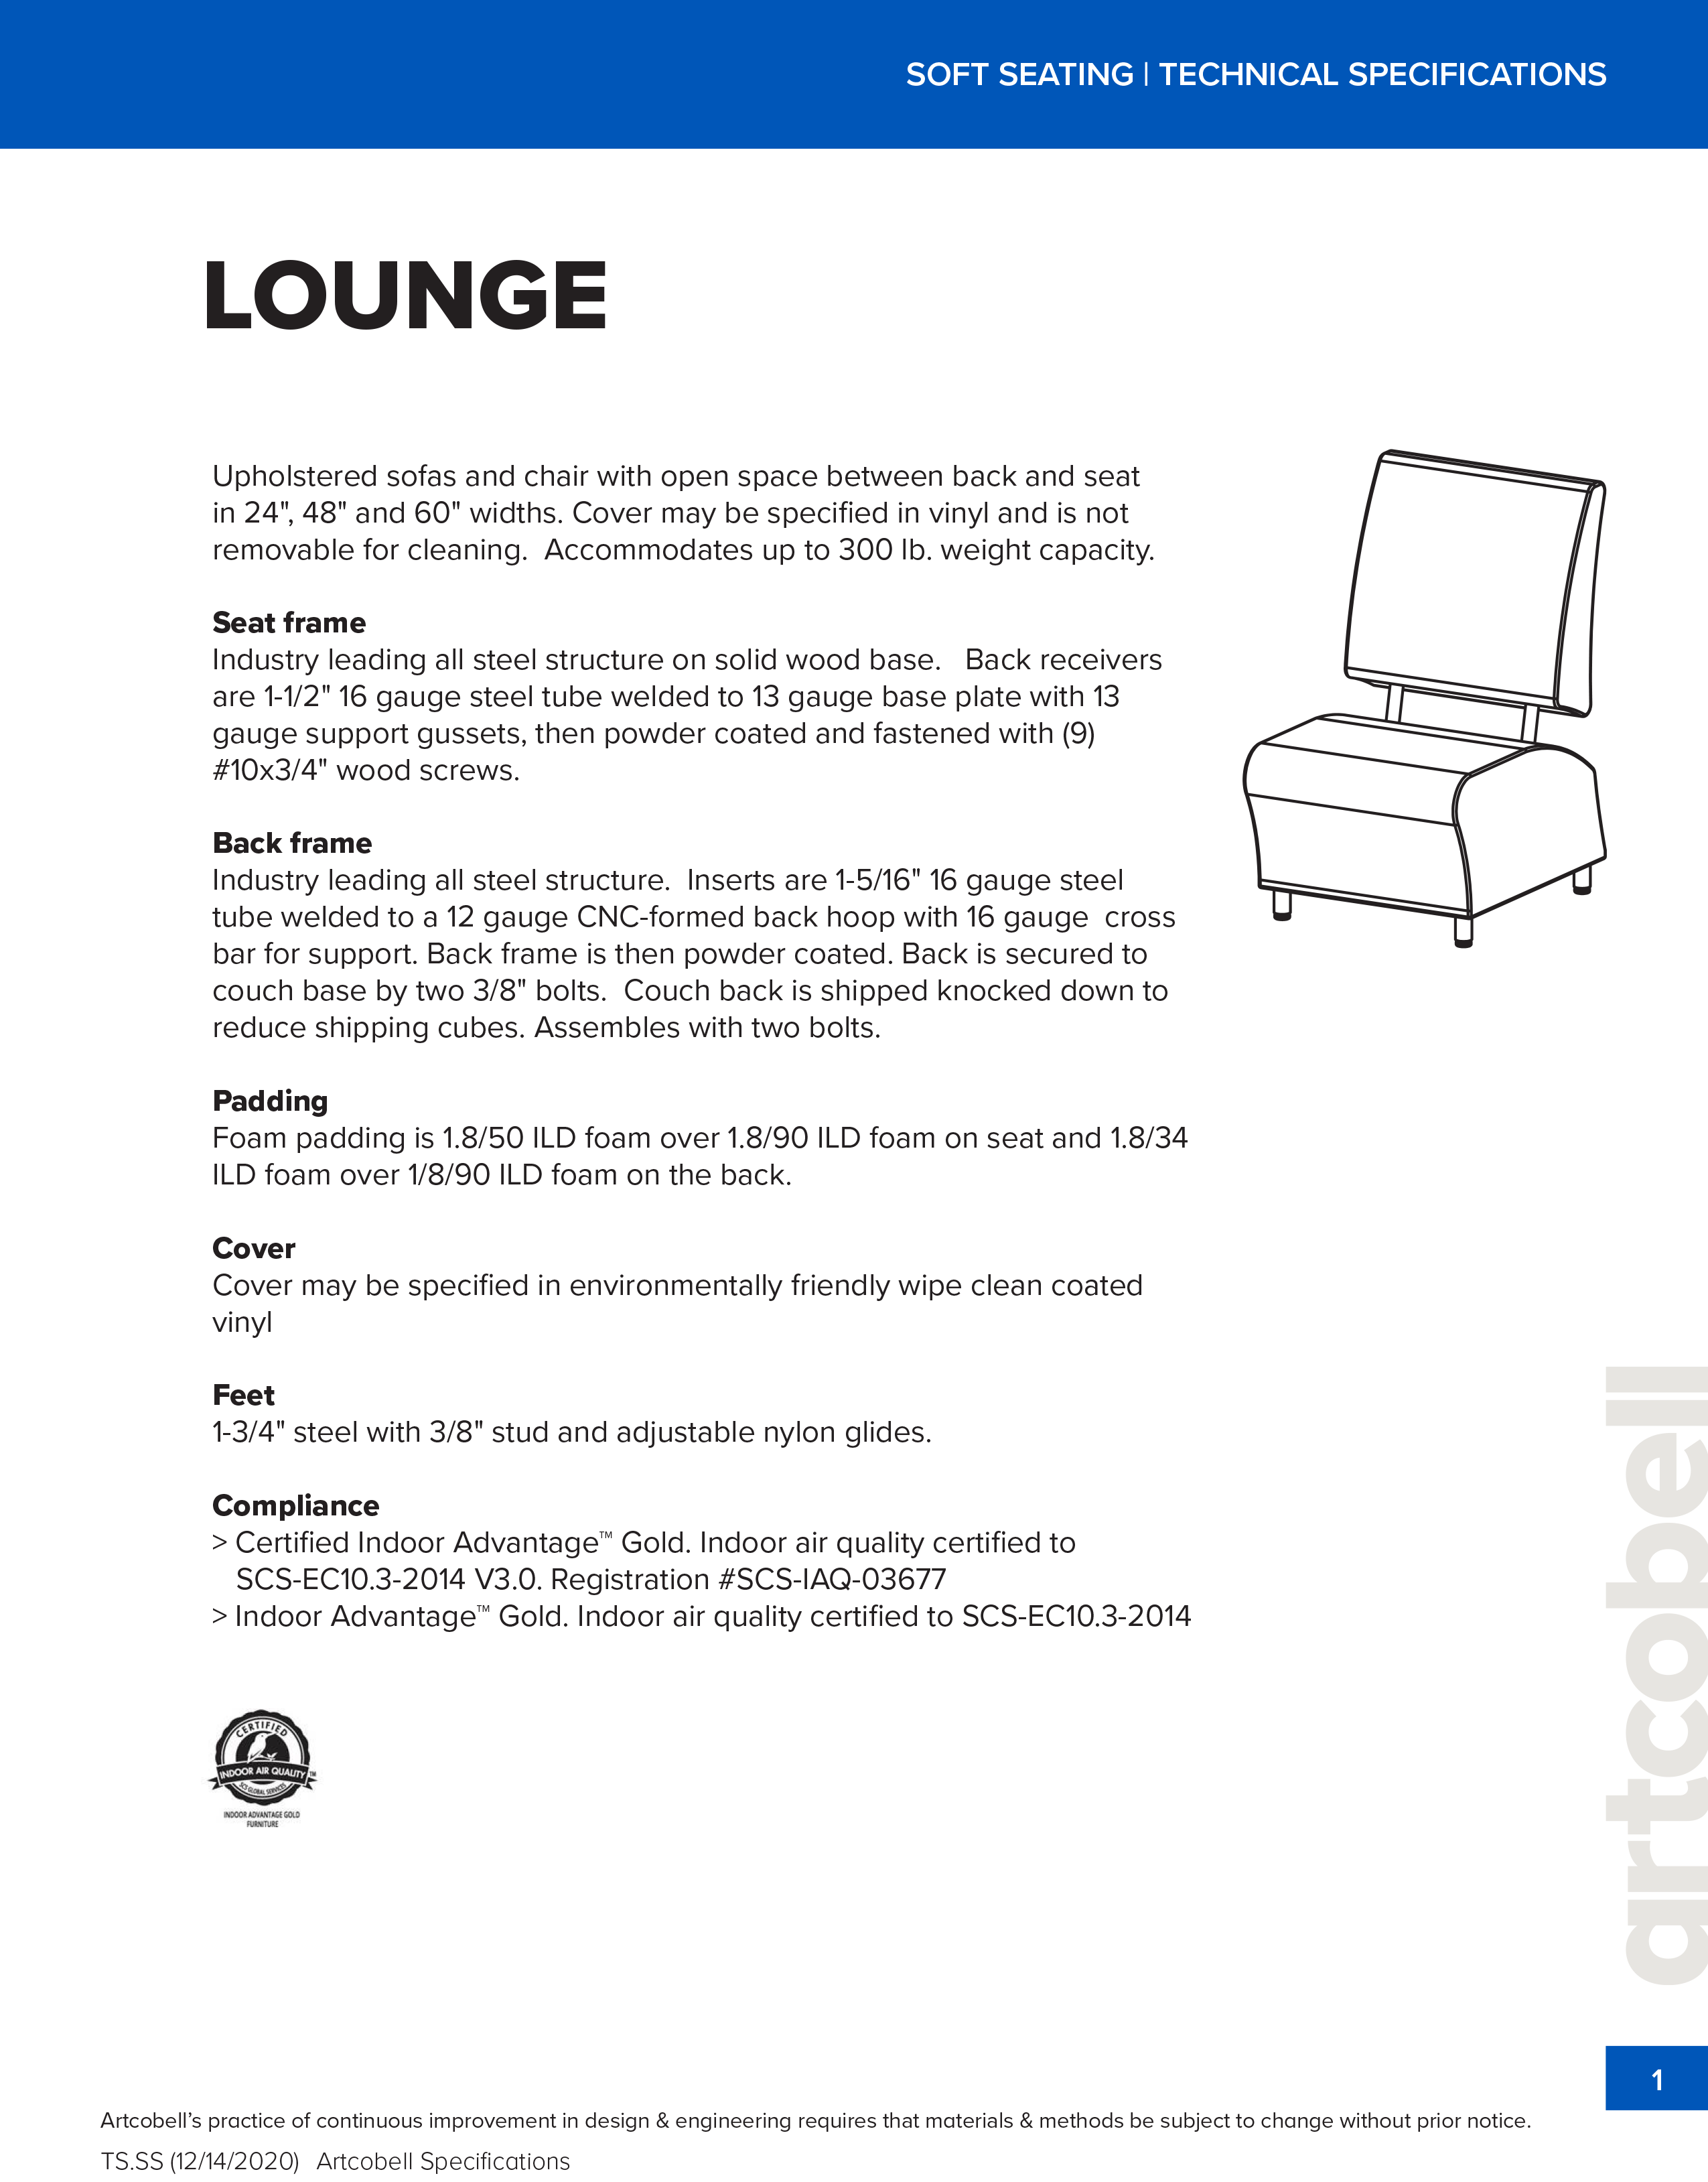 SoftSeatingSpecifications_Lounge